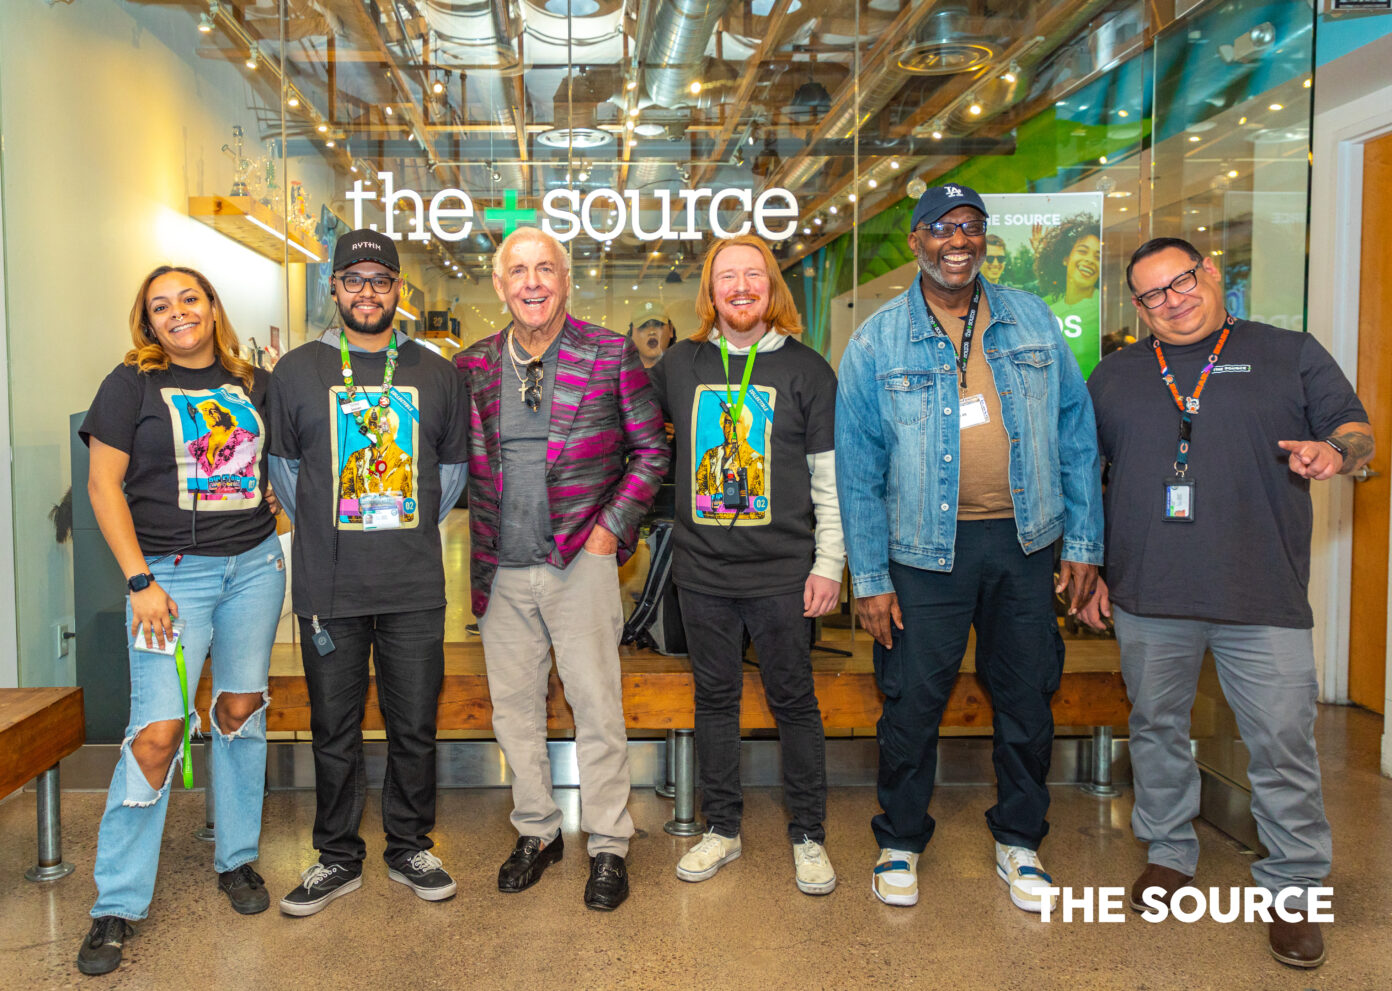 Legendary Pro-Wrestler Ric Flair Makes a Surprise Visit to The Source+